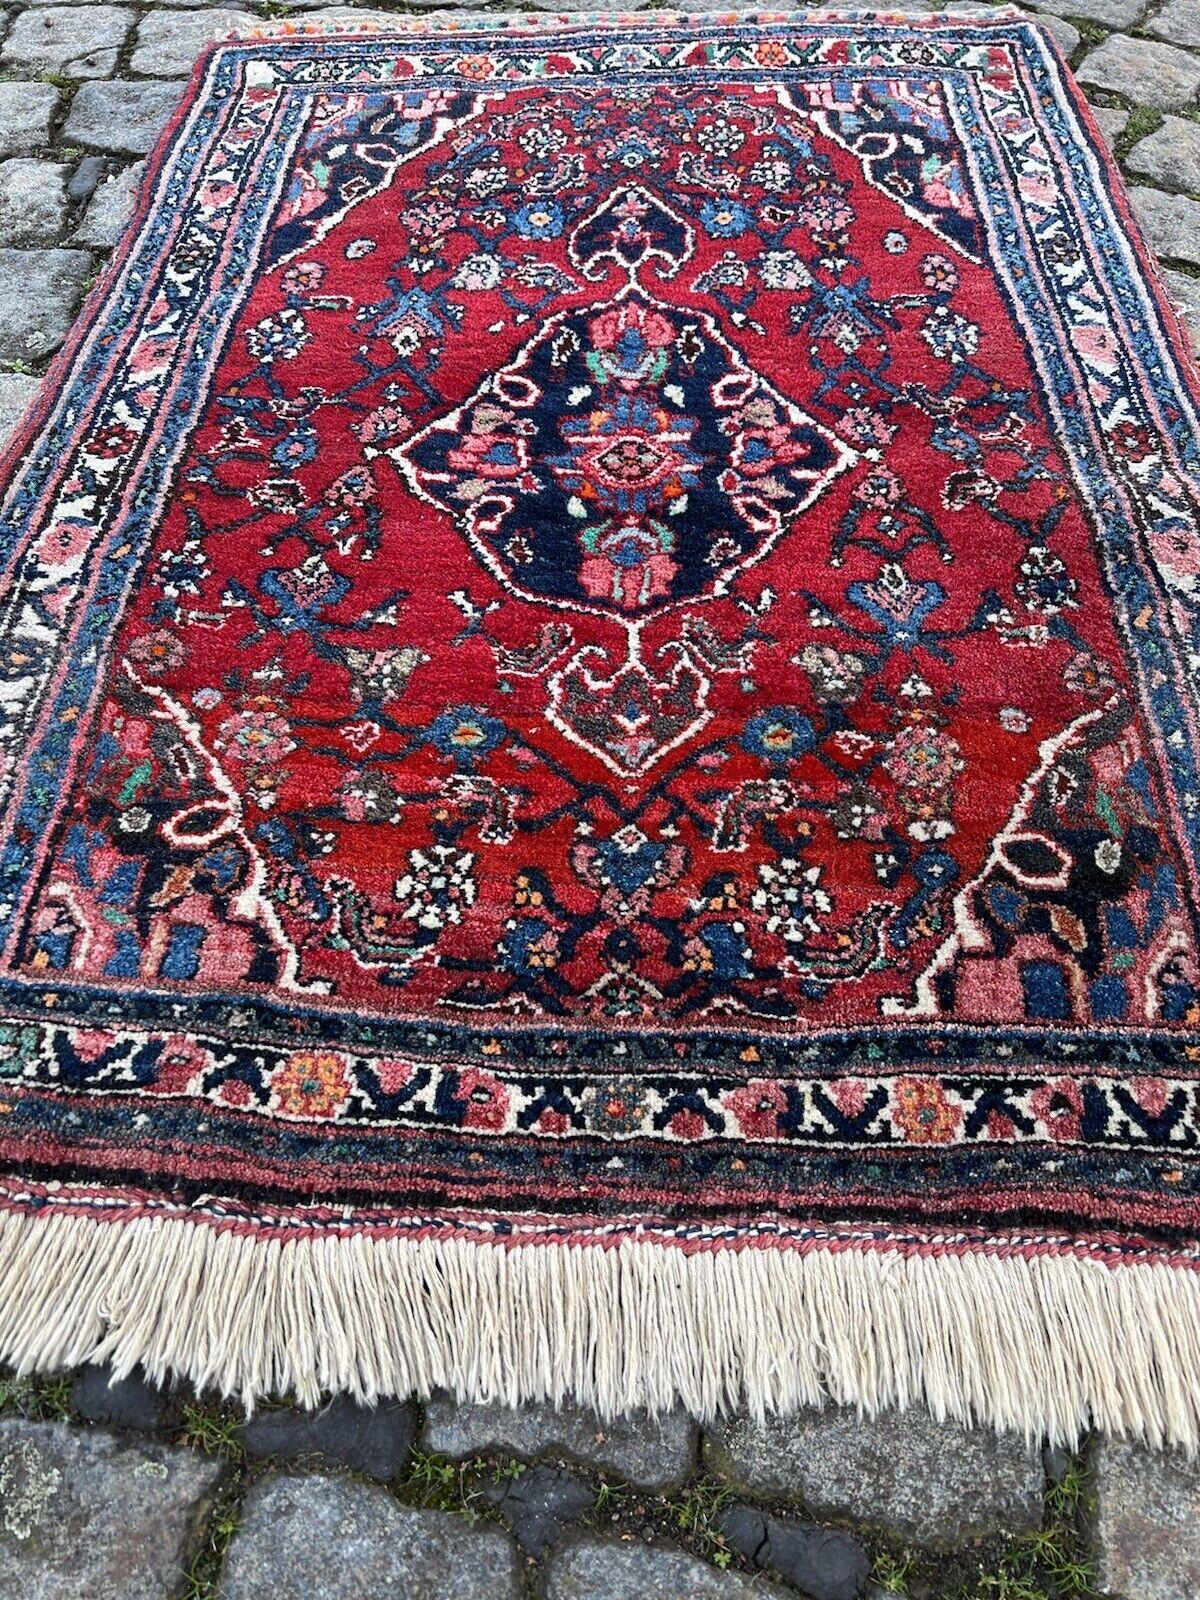 Handmade Vintage Persian Style Bidjar Rug
Overview:
Step into the splendor of our Handmade Vintage Persian Style Bidjar Rug, a testament to rich tradition and enduring craftsmanship. This authentic piece, dating back to the 1970s, exudes timeless